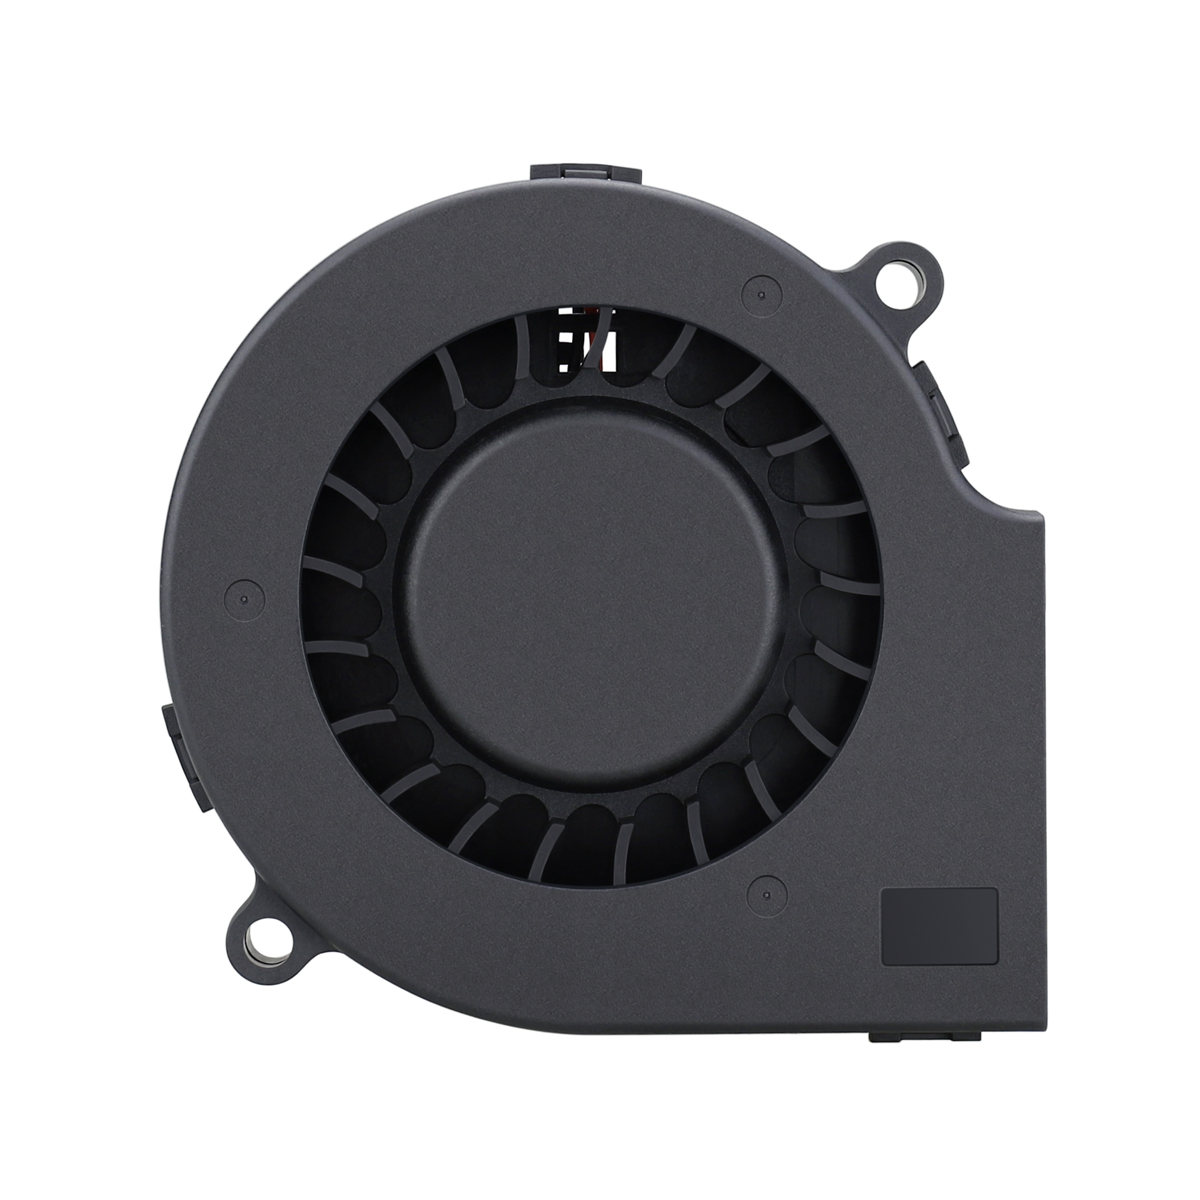 5V 0.12A Brushless Centrifugal Blower Turbo Cooling Fan 50x50x15mm 2pin 3600RPM 